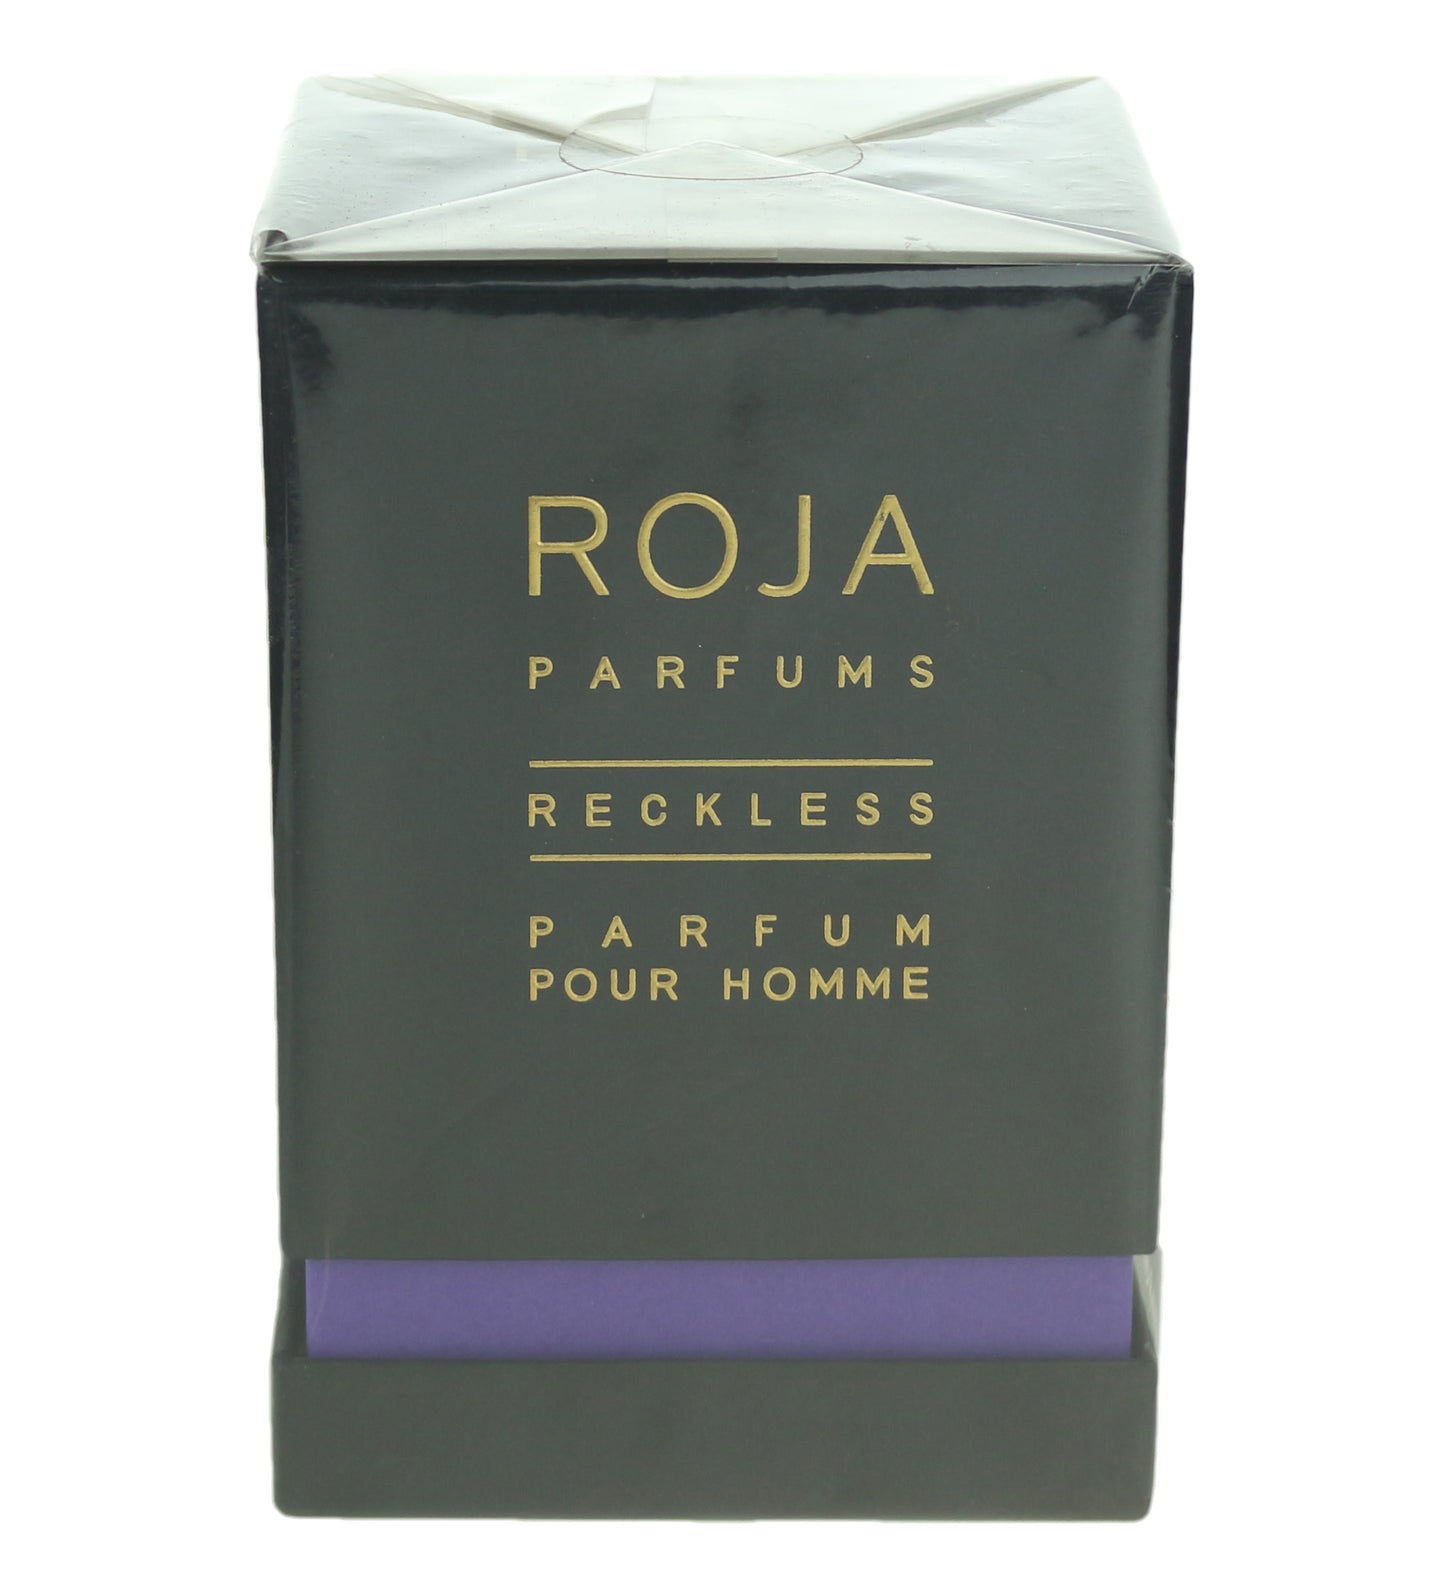 Roja Dove 'Reckless Pour Homme' Parfum 1.7oz/50ml New In Box